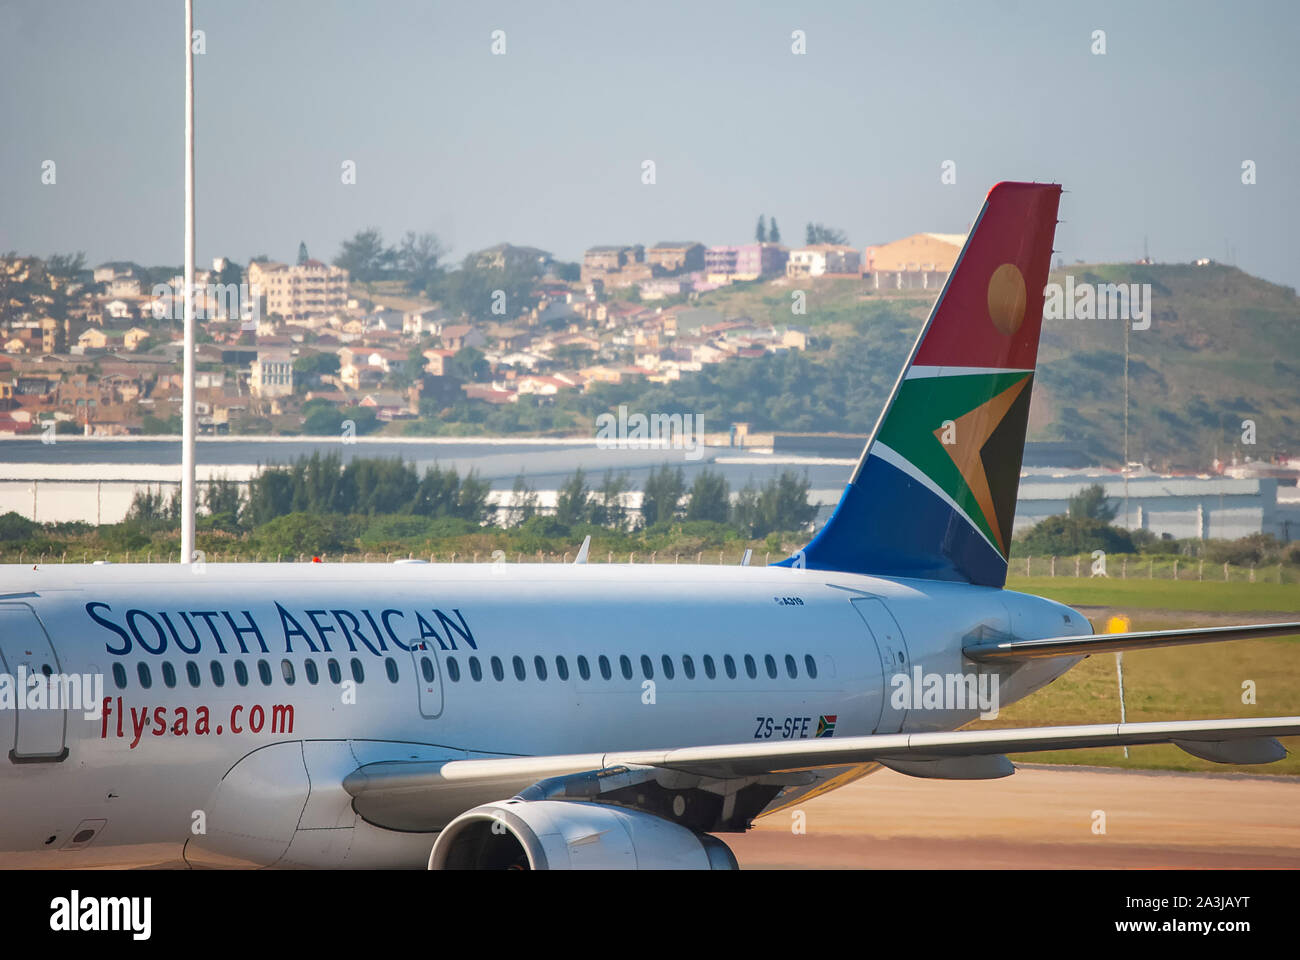 South African Airways aircraft at King Shaka International Airport in Durban, South Africa Stock Photo